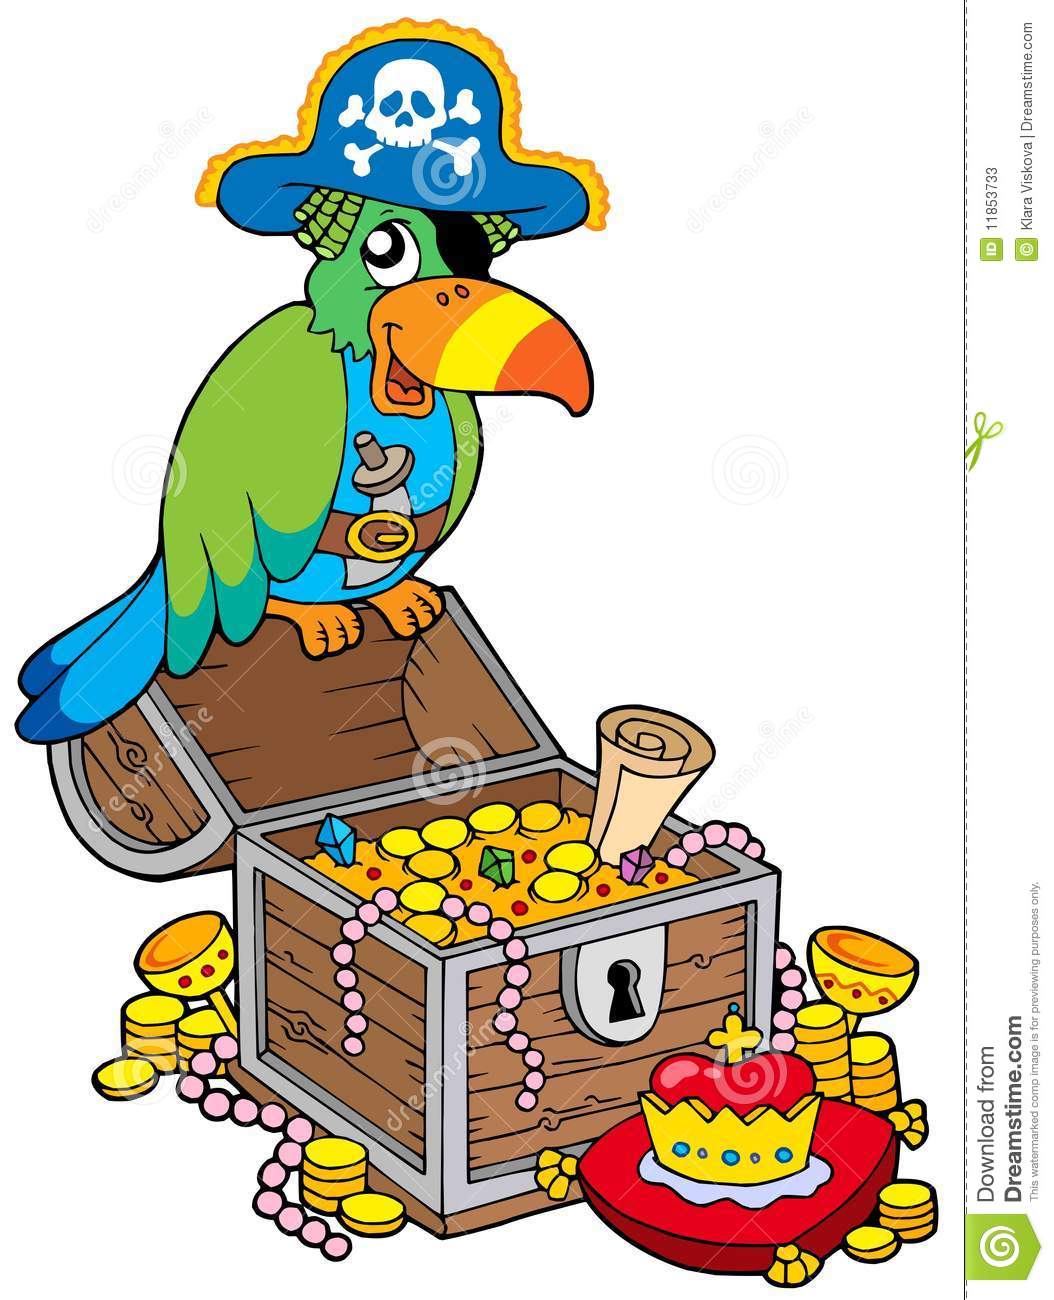 Big Treasure Chest With Pirate Parrot Stock Photos   Image  11853733